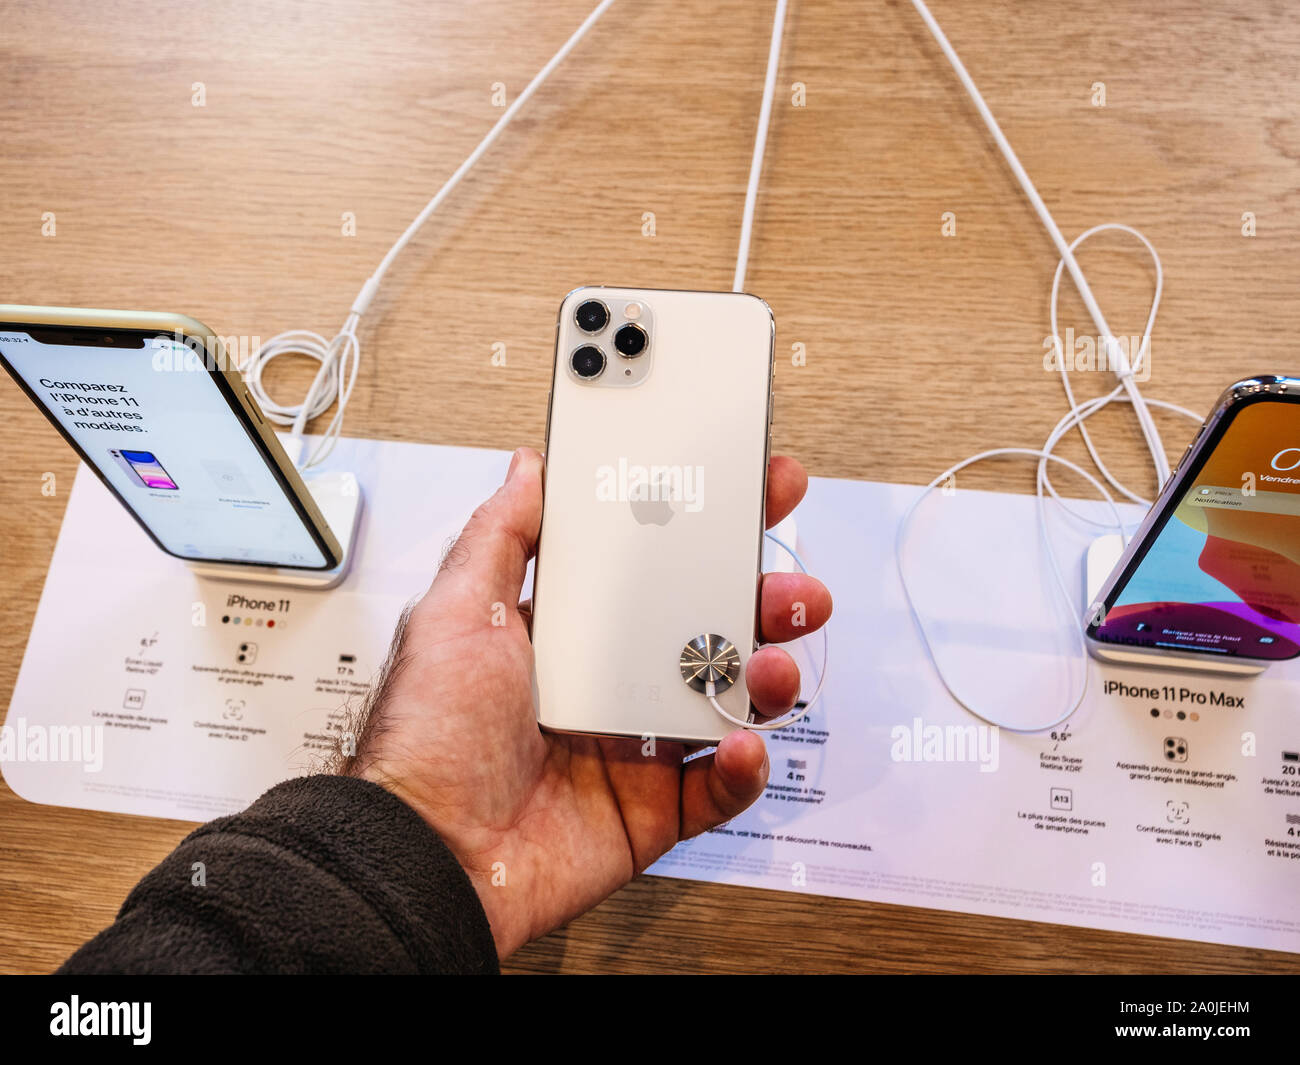 Paris France Sep 19 Man Hand Holding Looking At Triple Camera Of The New White Iphone 11 11 Pro And Pro Max Are Displayed In Apple Store As The Smartphone